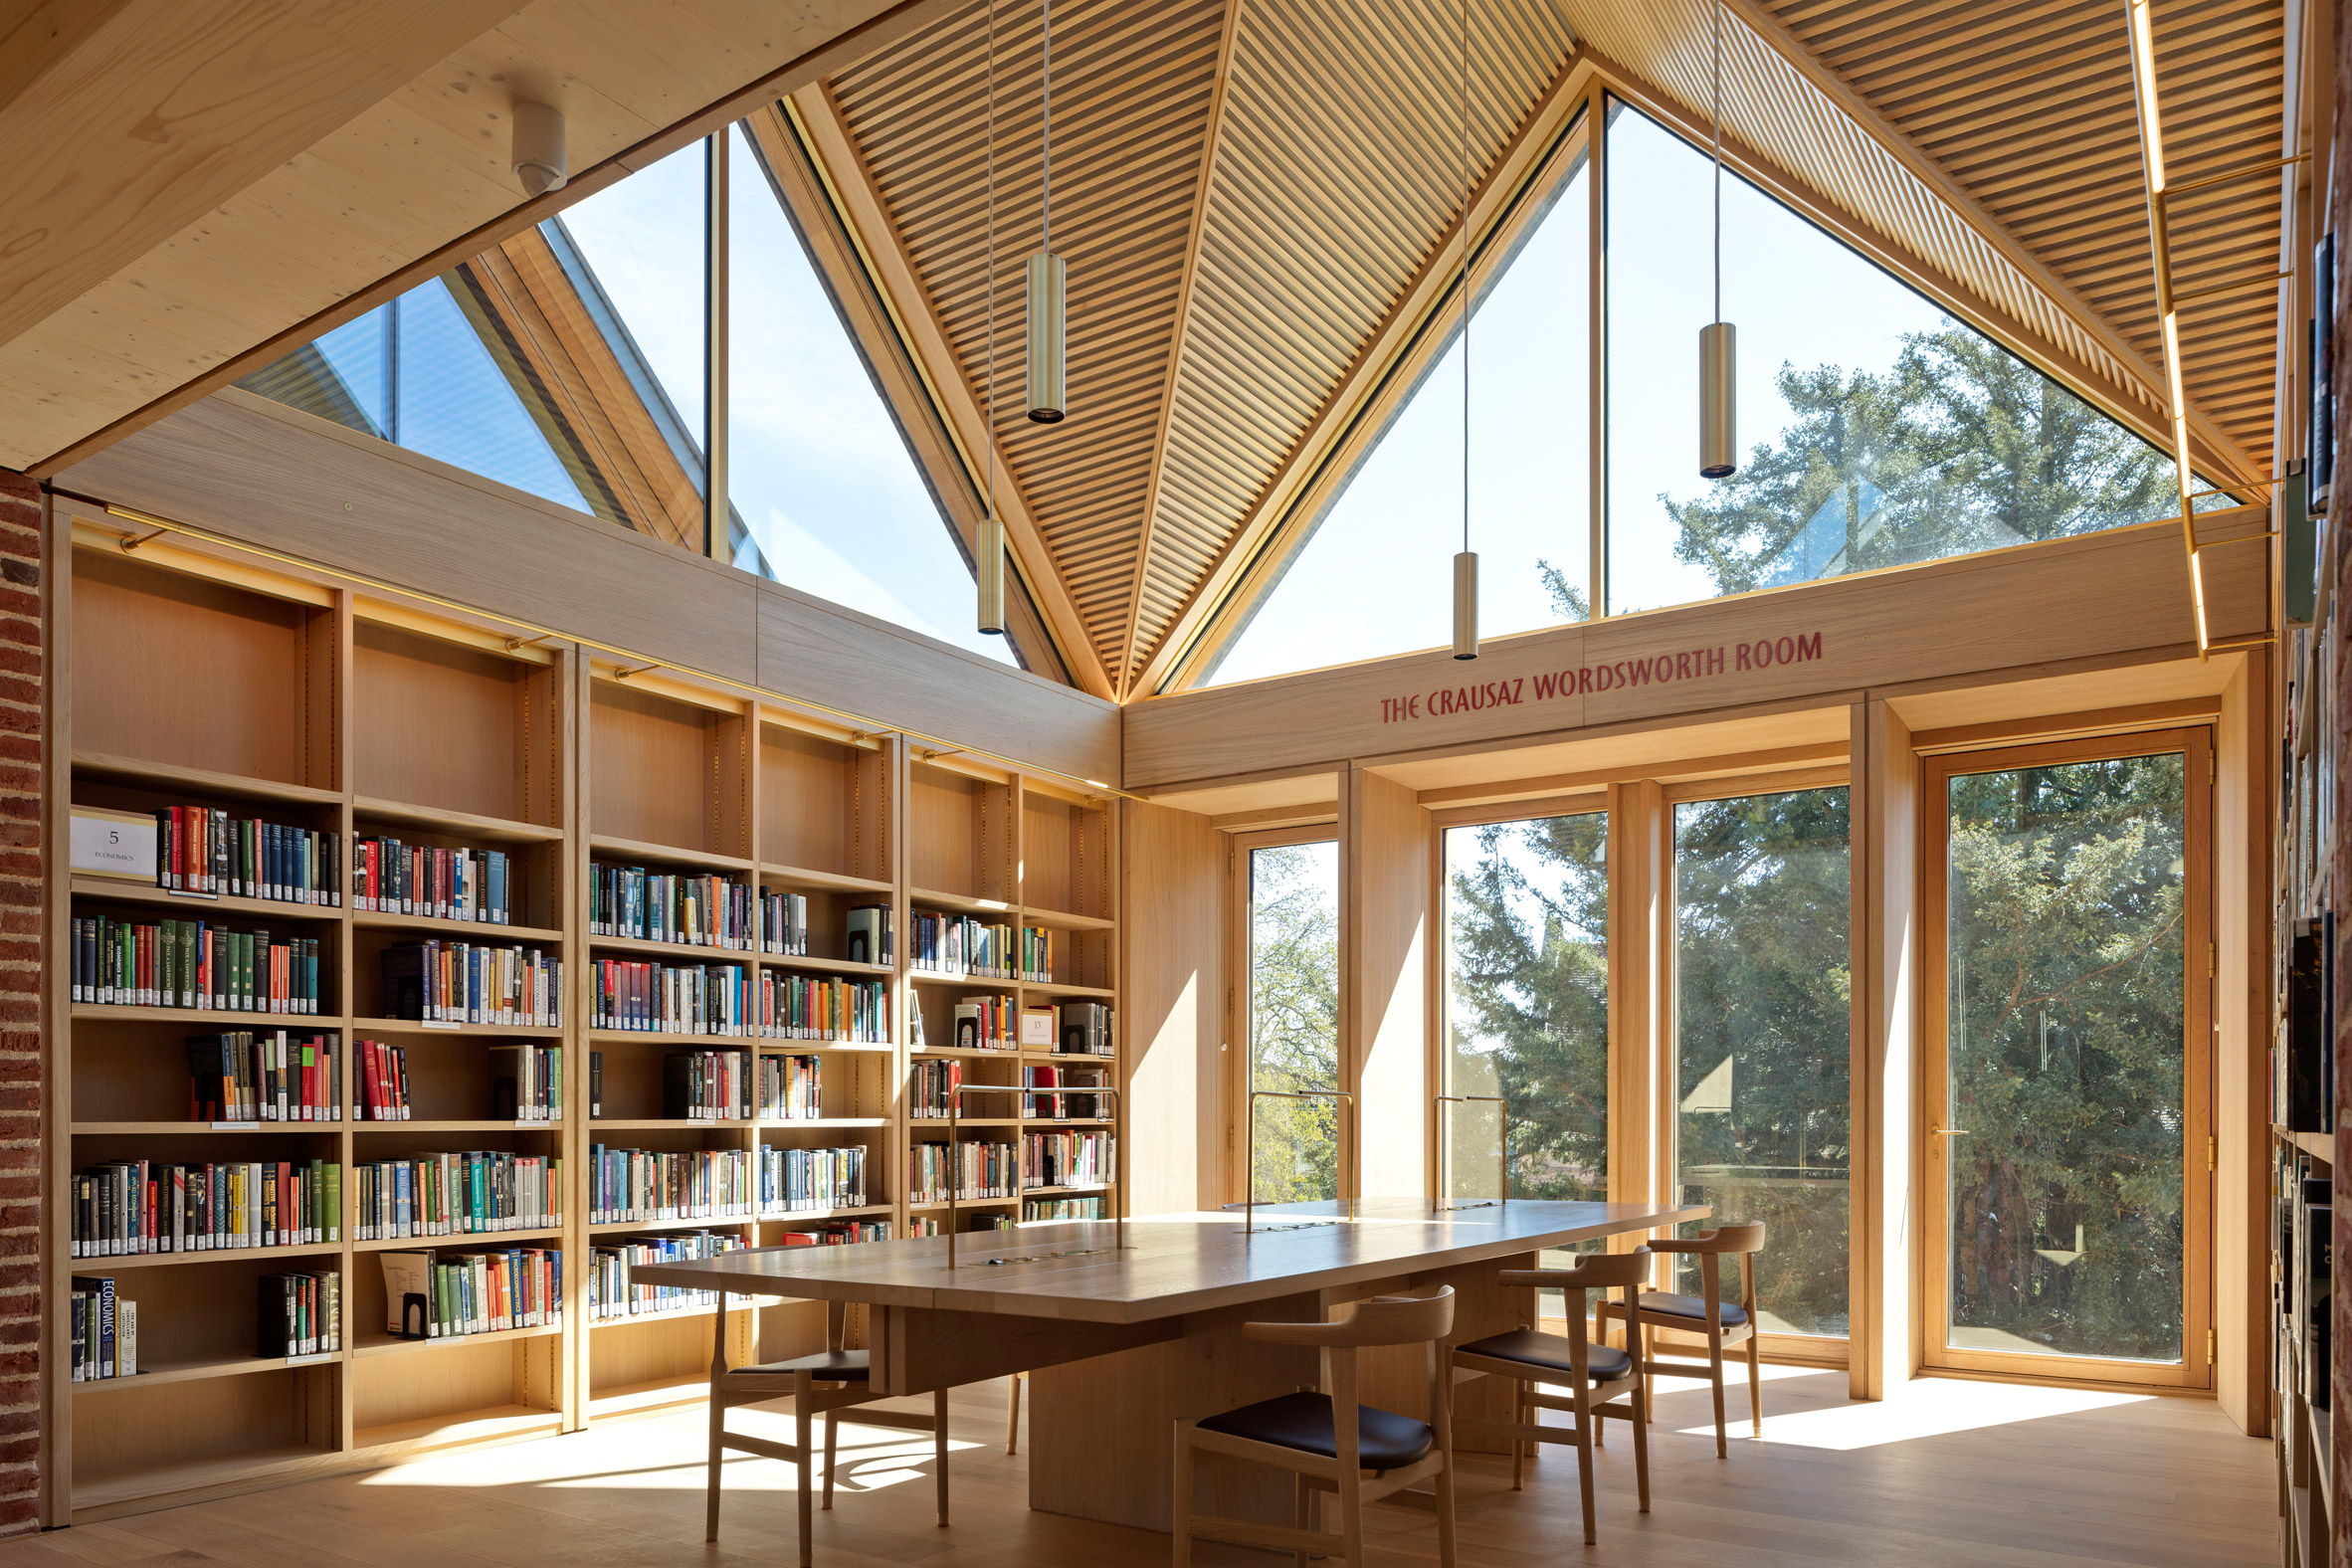 Interior of a Stirling Prize winning library